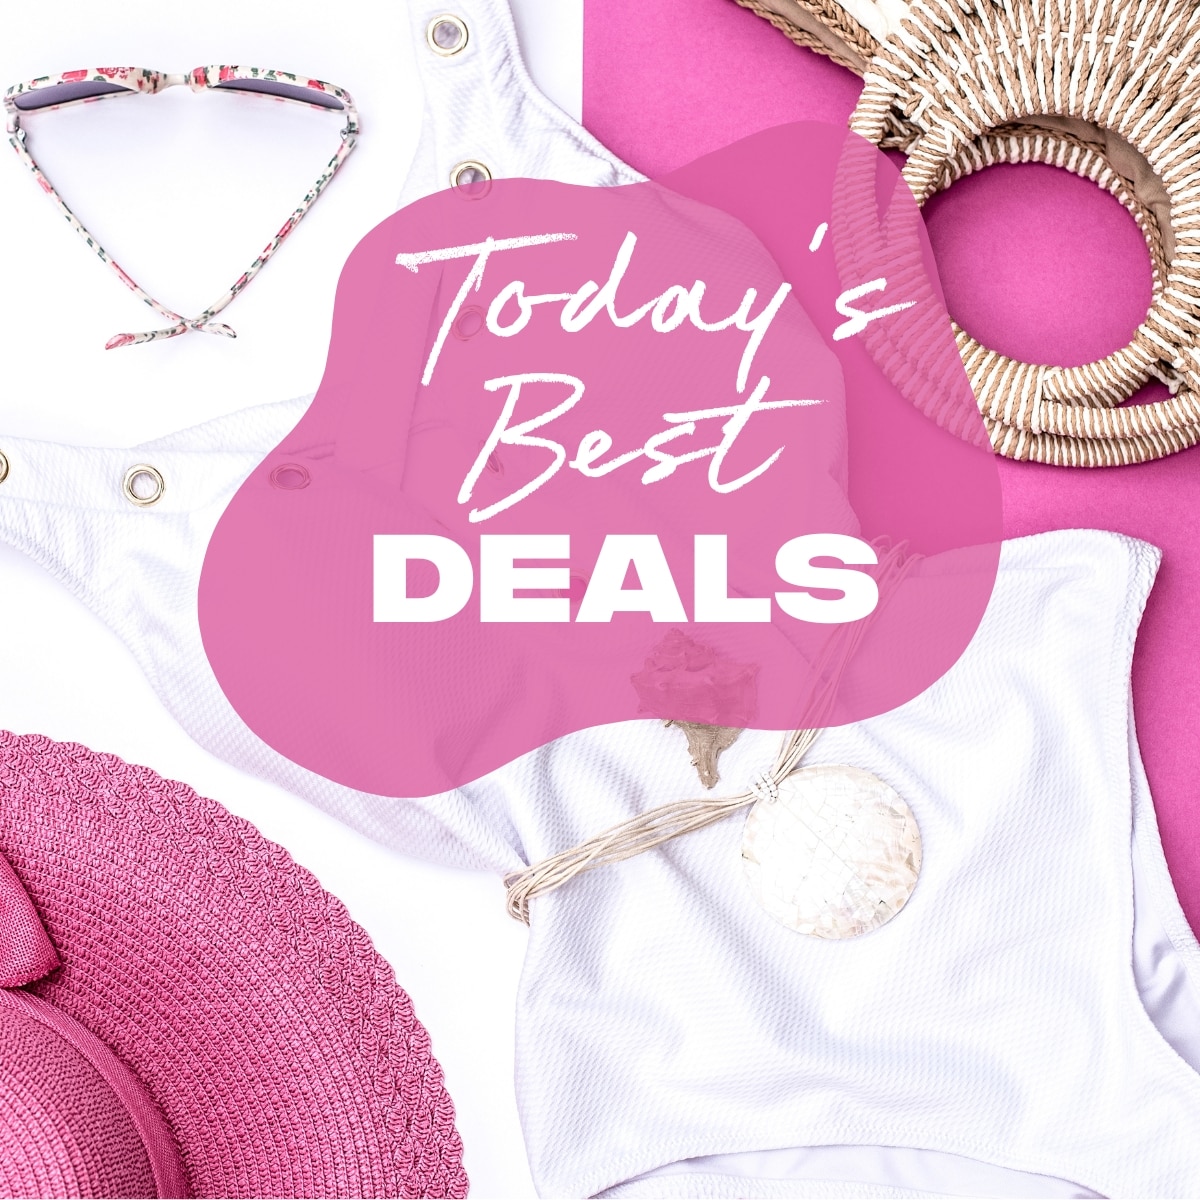 
                        Score 70% Off Aerie, an Extra 25% Off Tory Burch Sale Styles & More
                